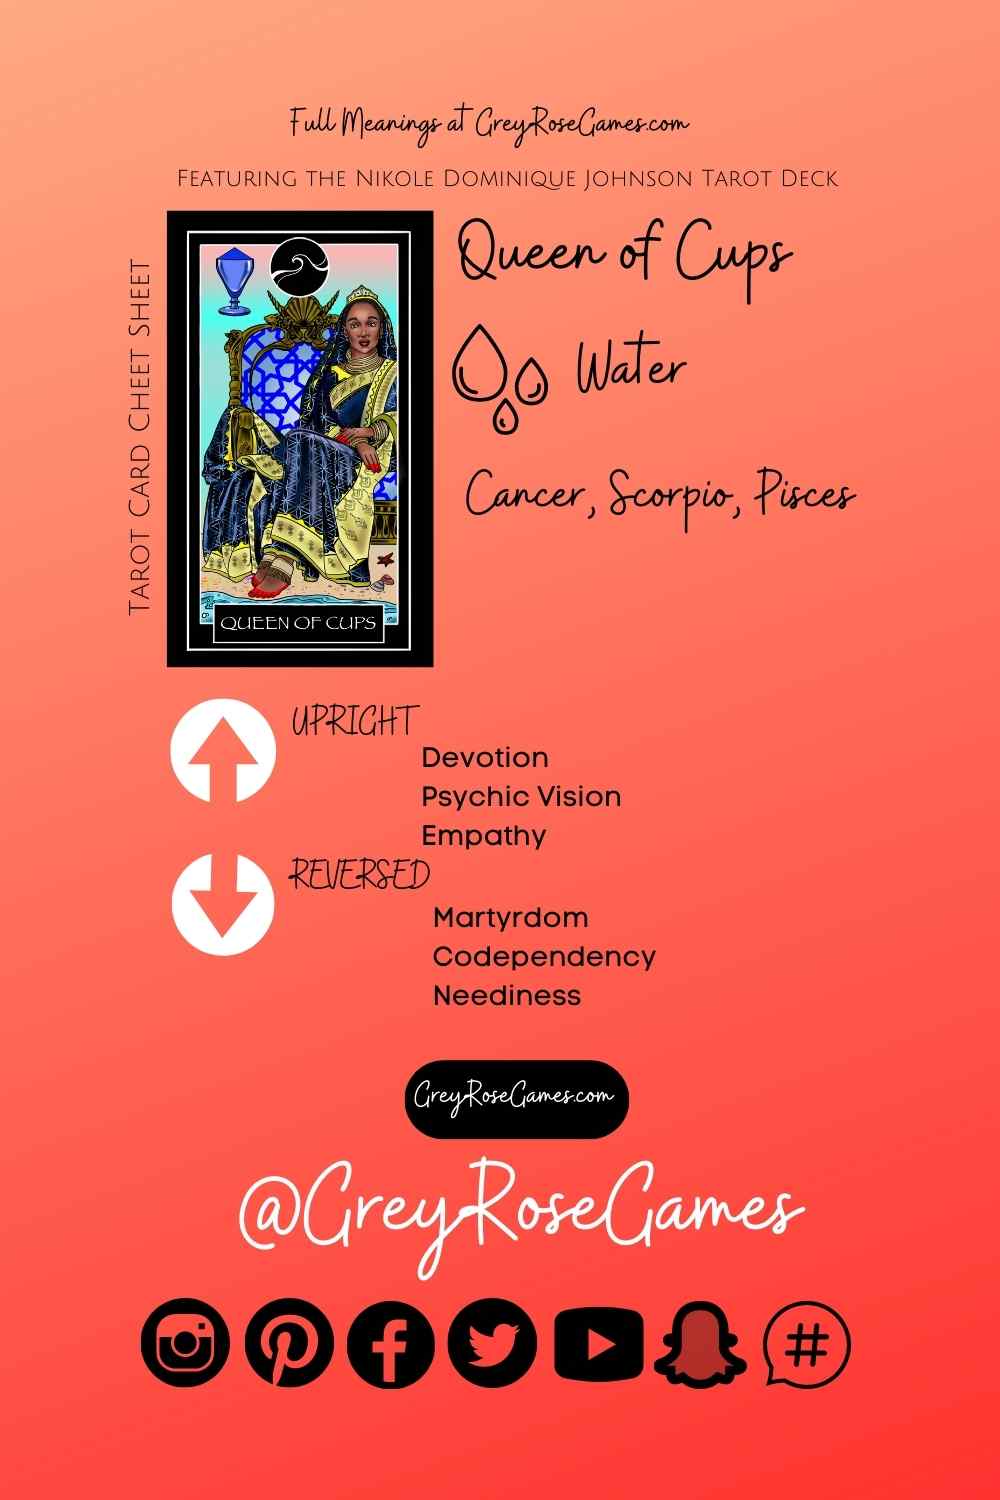 Queen of Cups Meaning Nikole Dominique Johnson Tarot Meaning